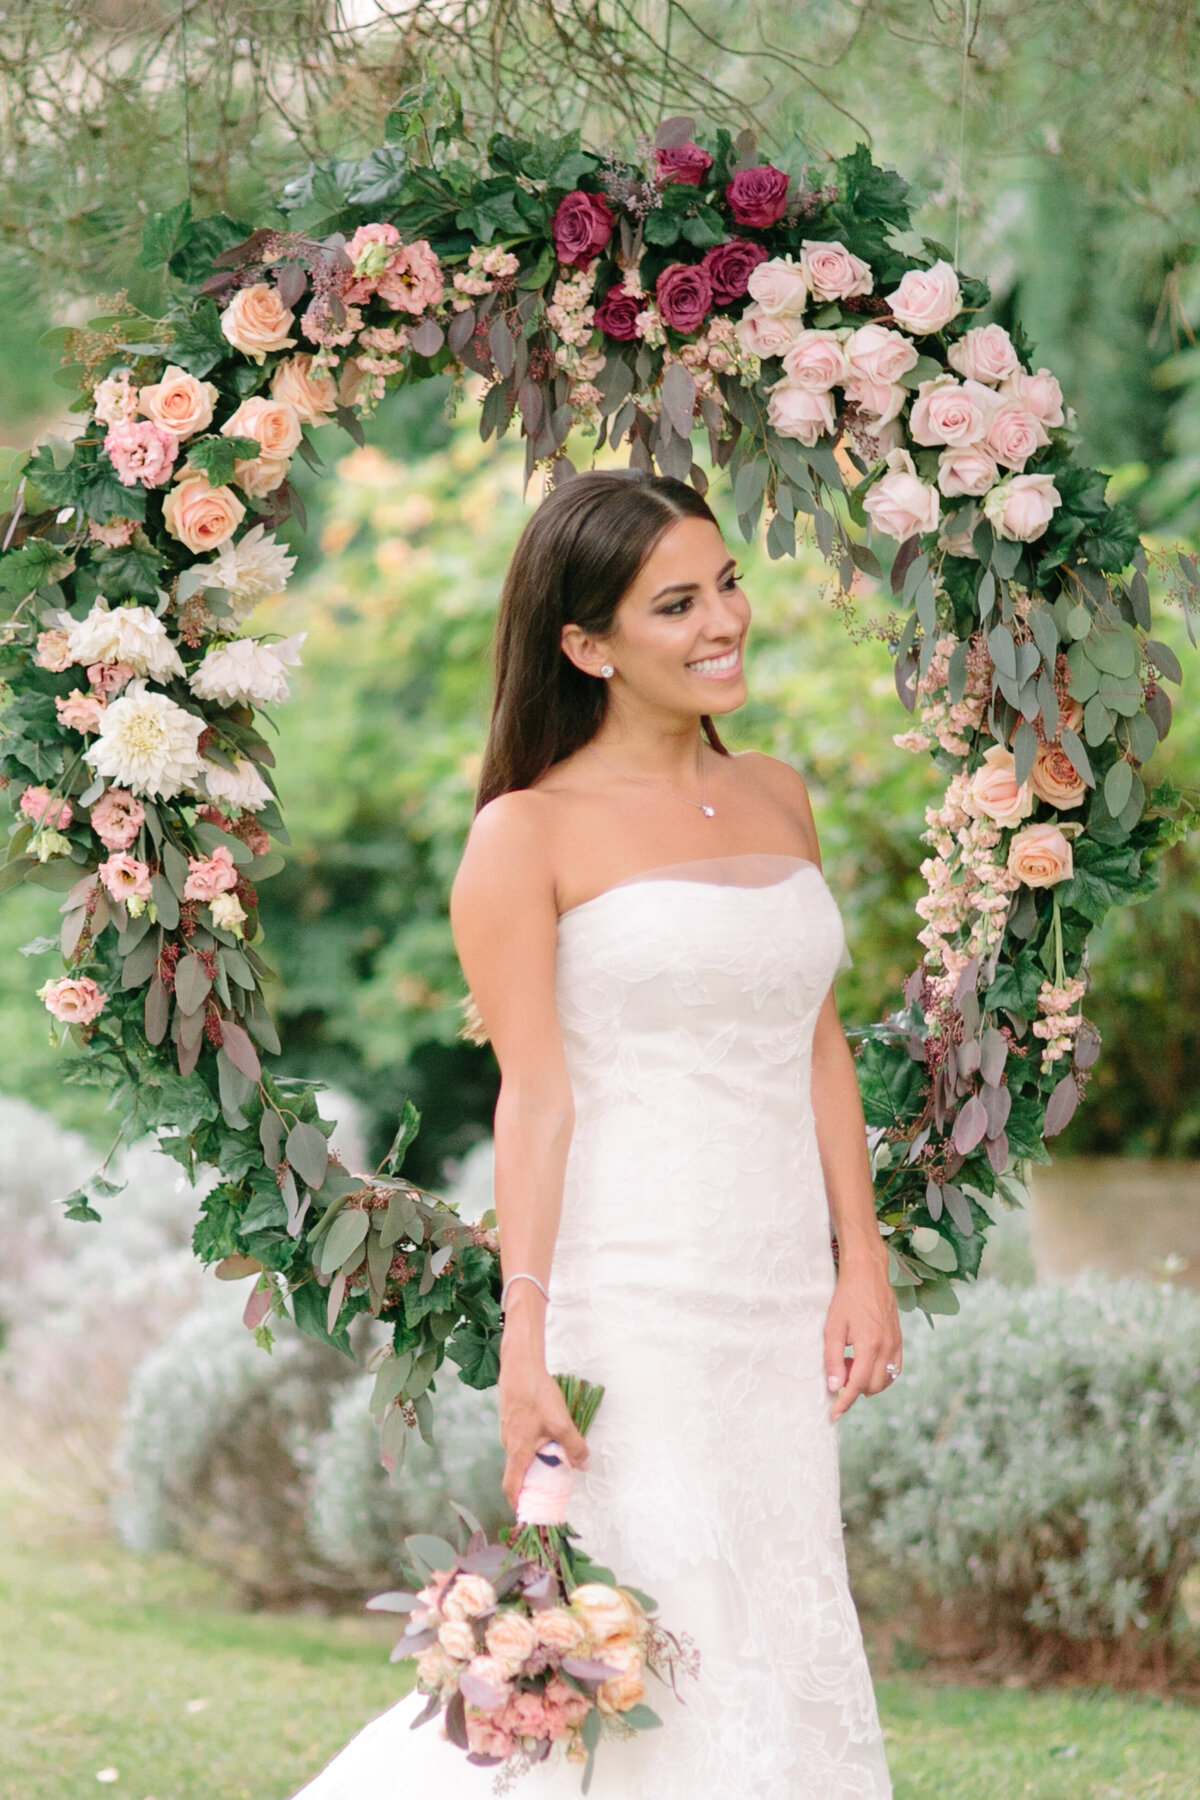 Stunning bride and rose-covered round arch